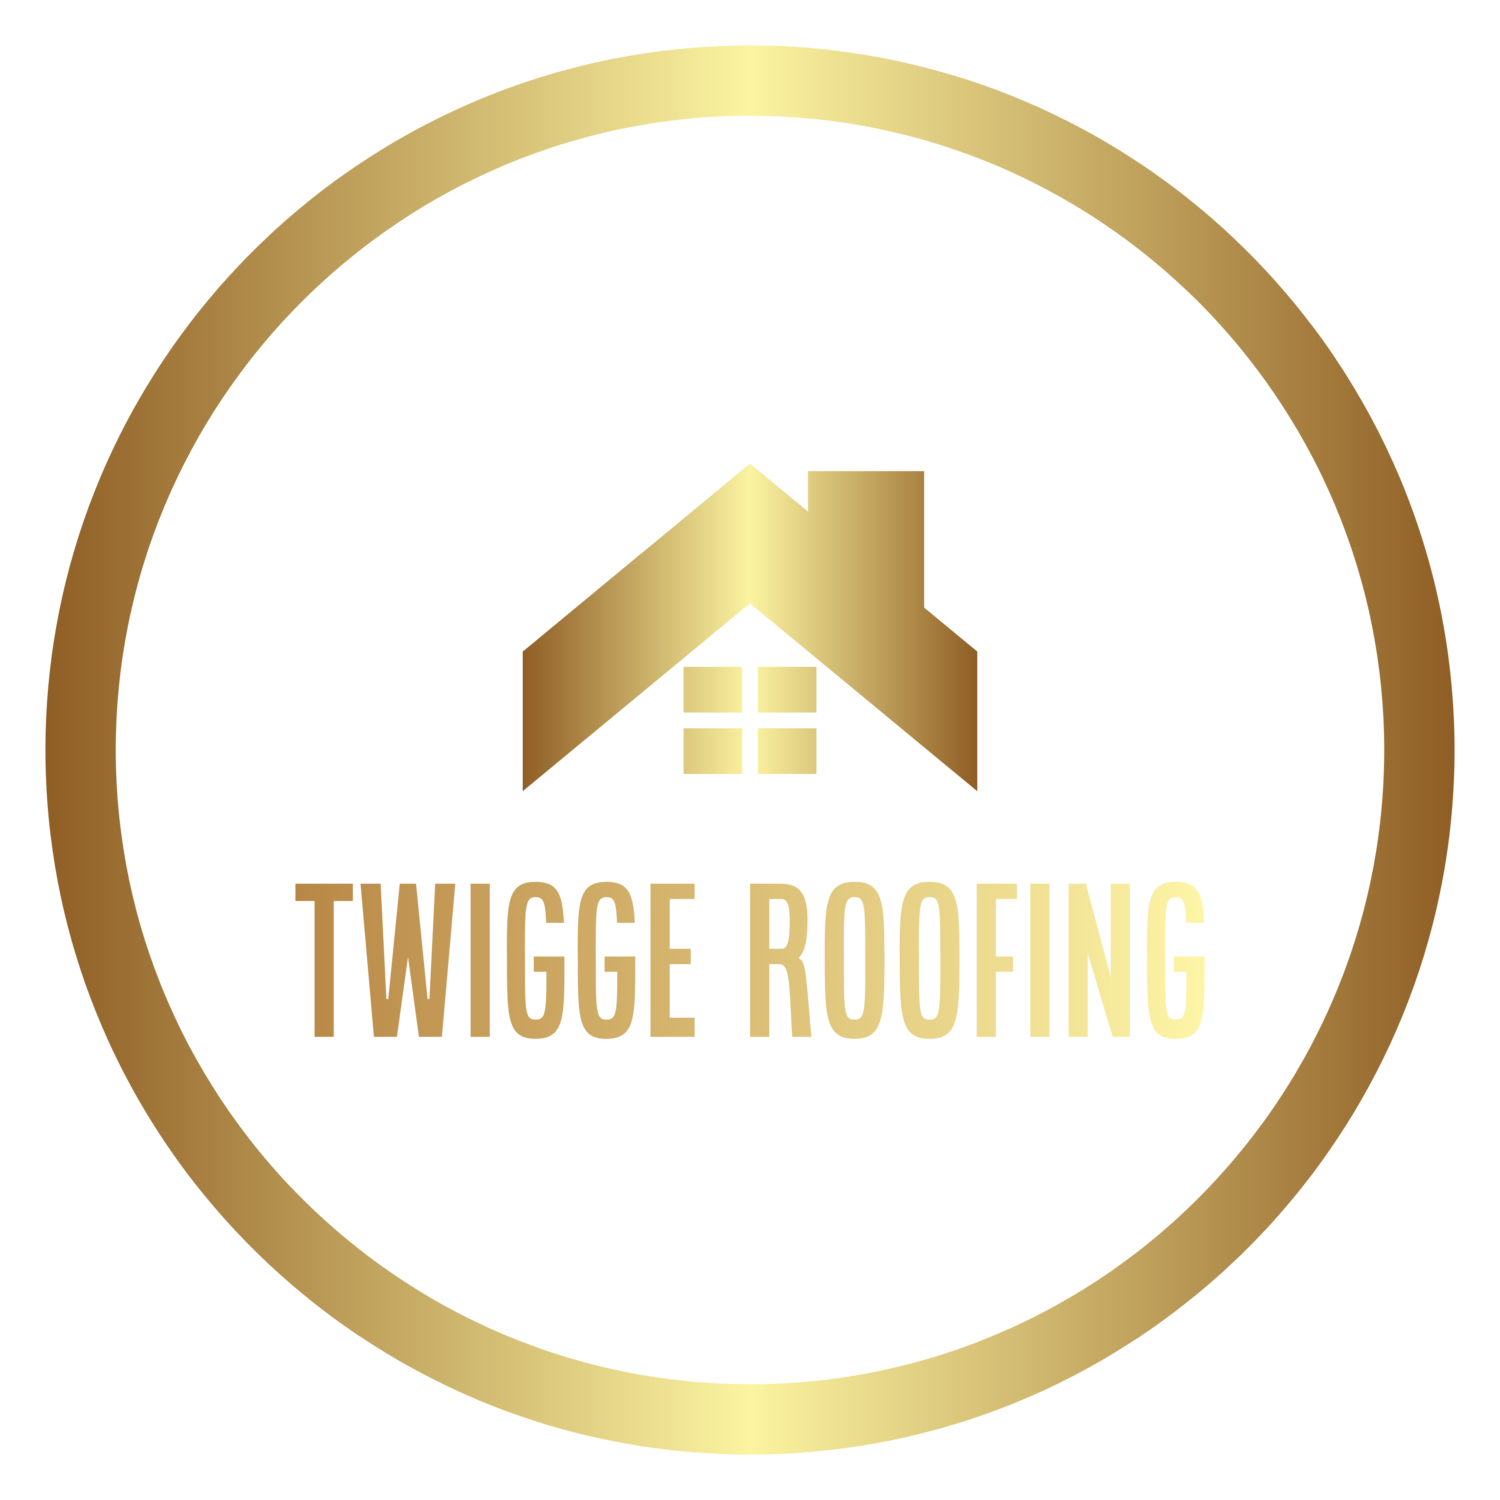 Twigge Roofing